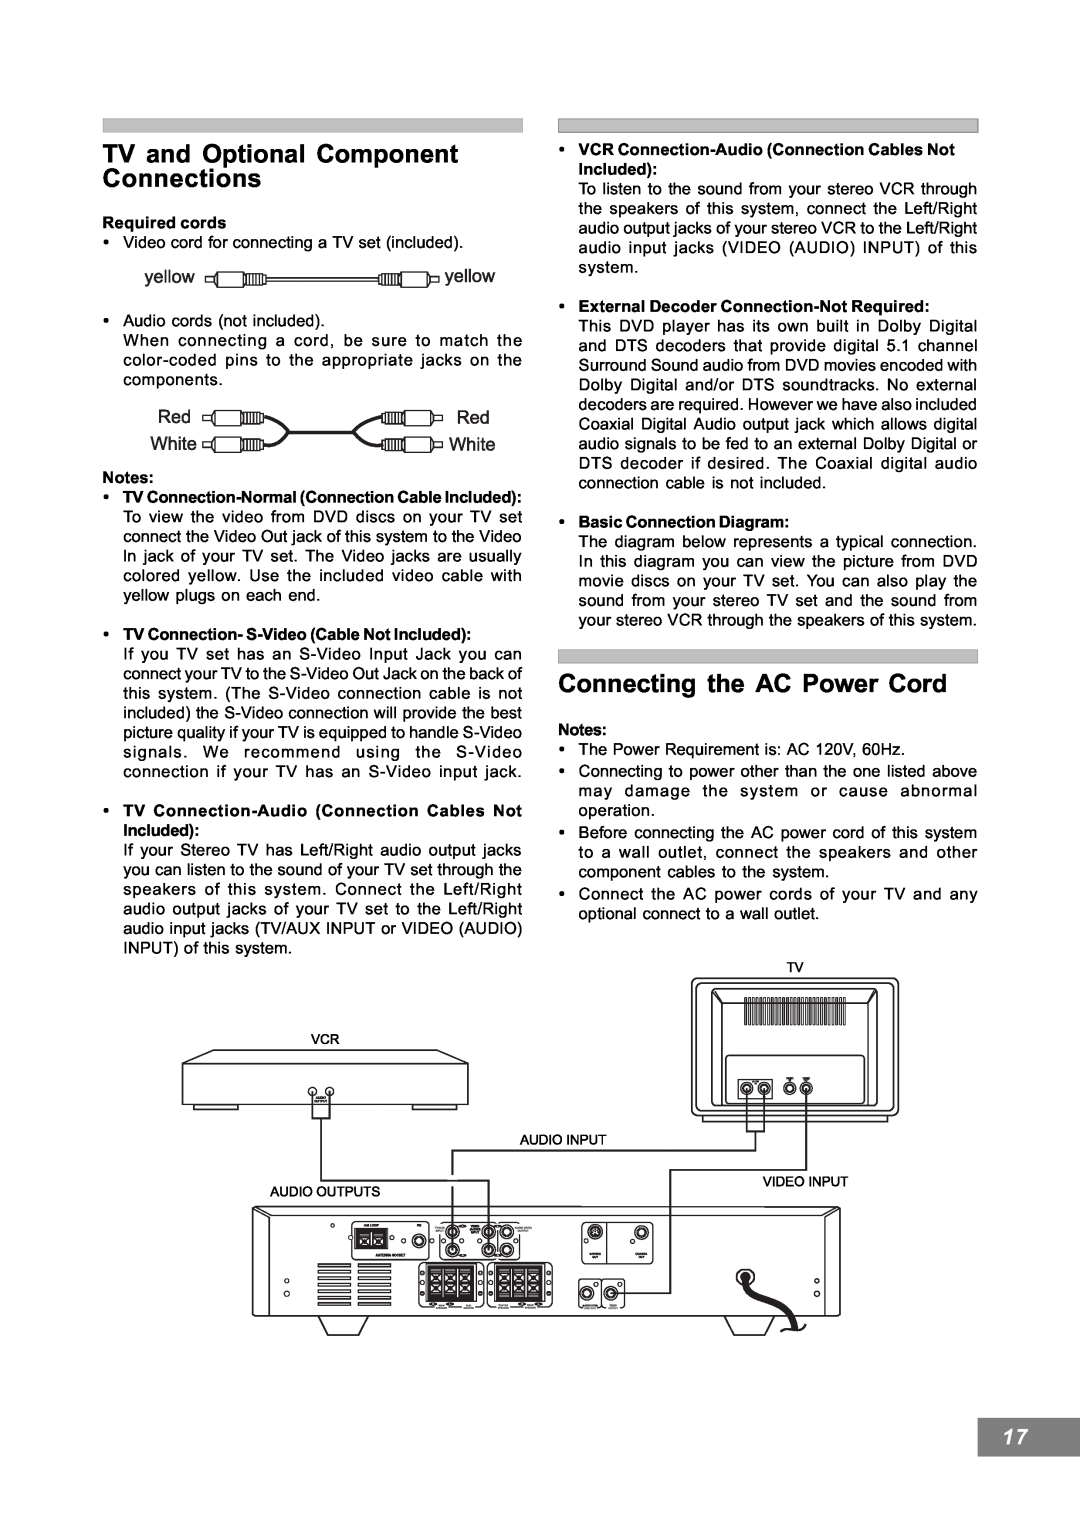 Emerson AV101 manual TV and Optional Component Connections, Connecting the AC Power Cord 